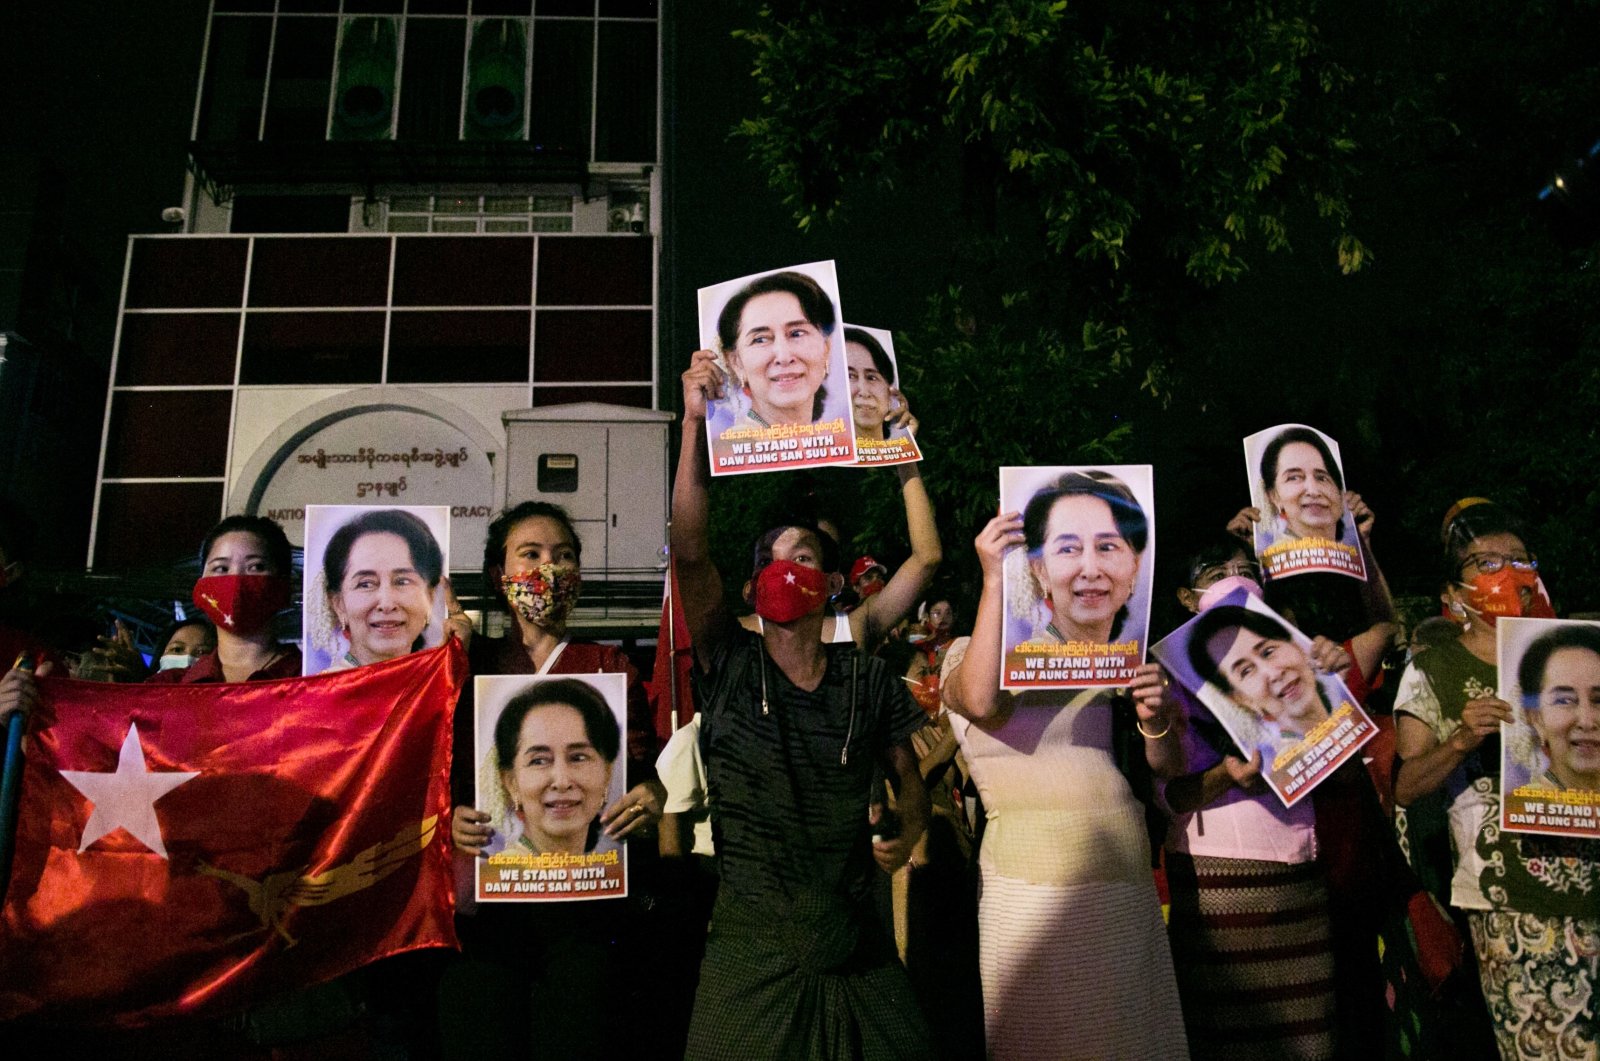 Supporters of the National League for Democracy (NLD) party hold portraits of Aung San Suu Kyi as they celebrate the unofficial election results in front of the party's headquarters in Yangon, Myanmar, Nov. 9, 2020. (AFP Photo)